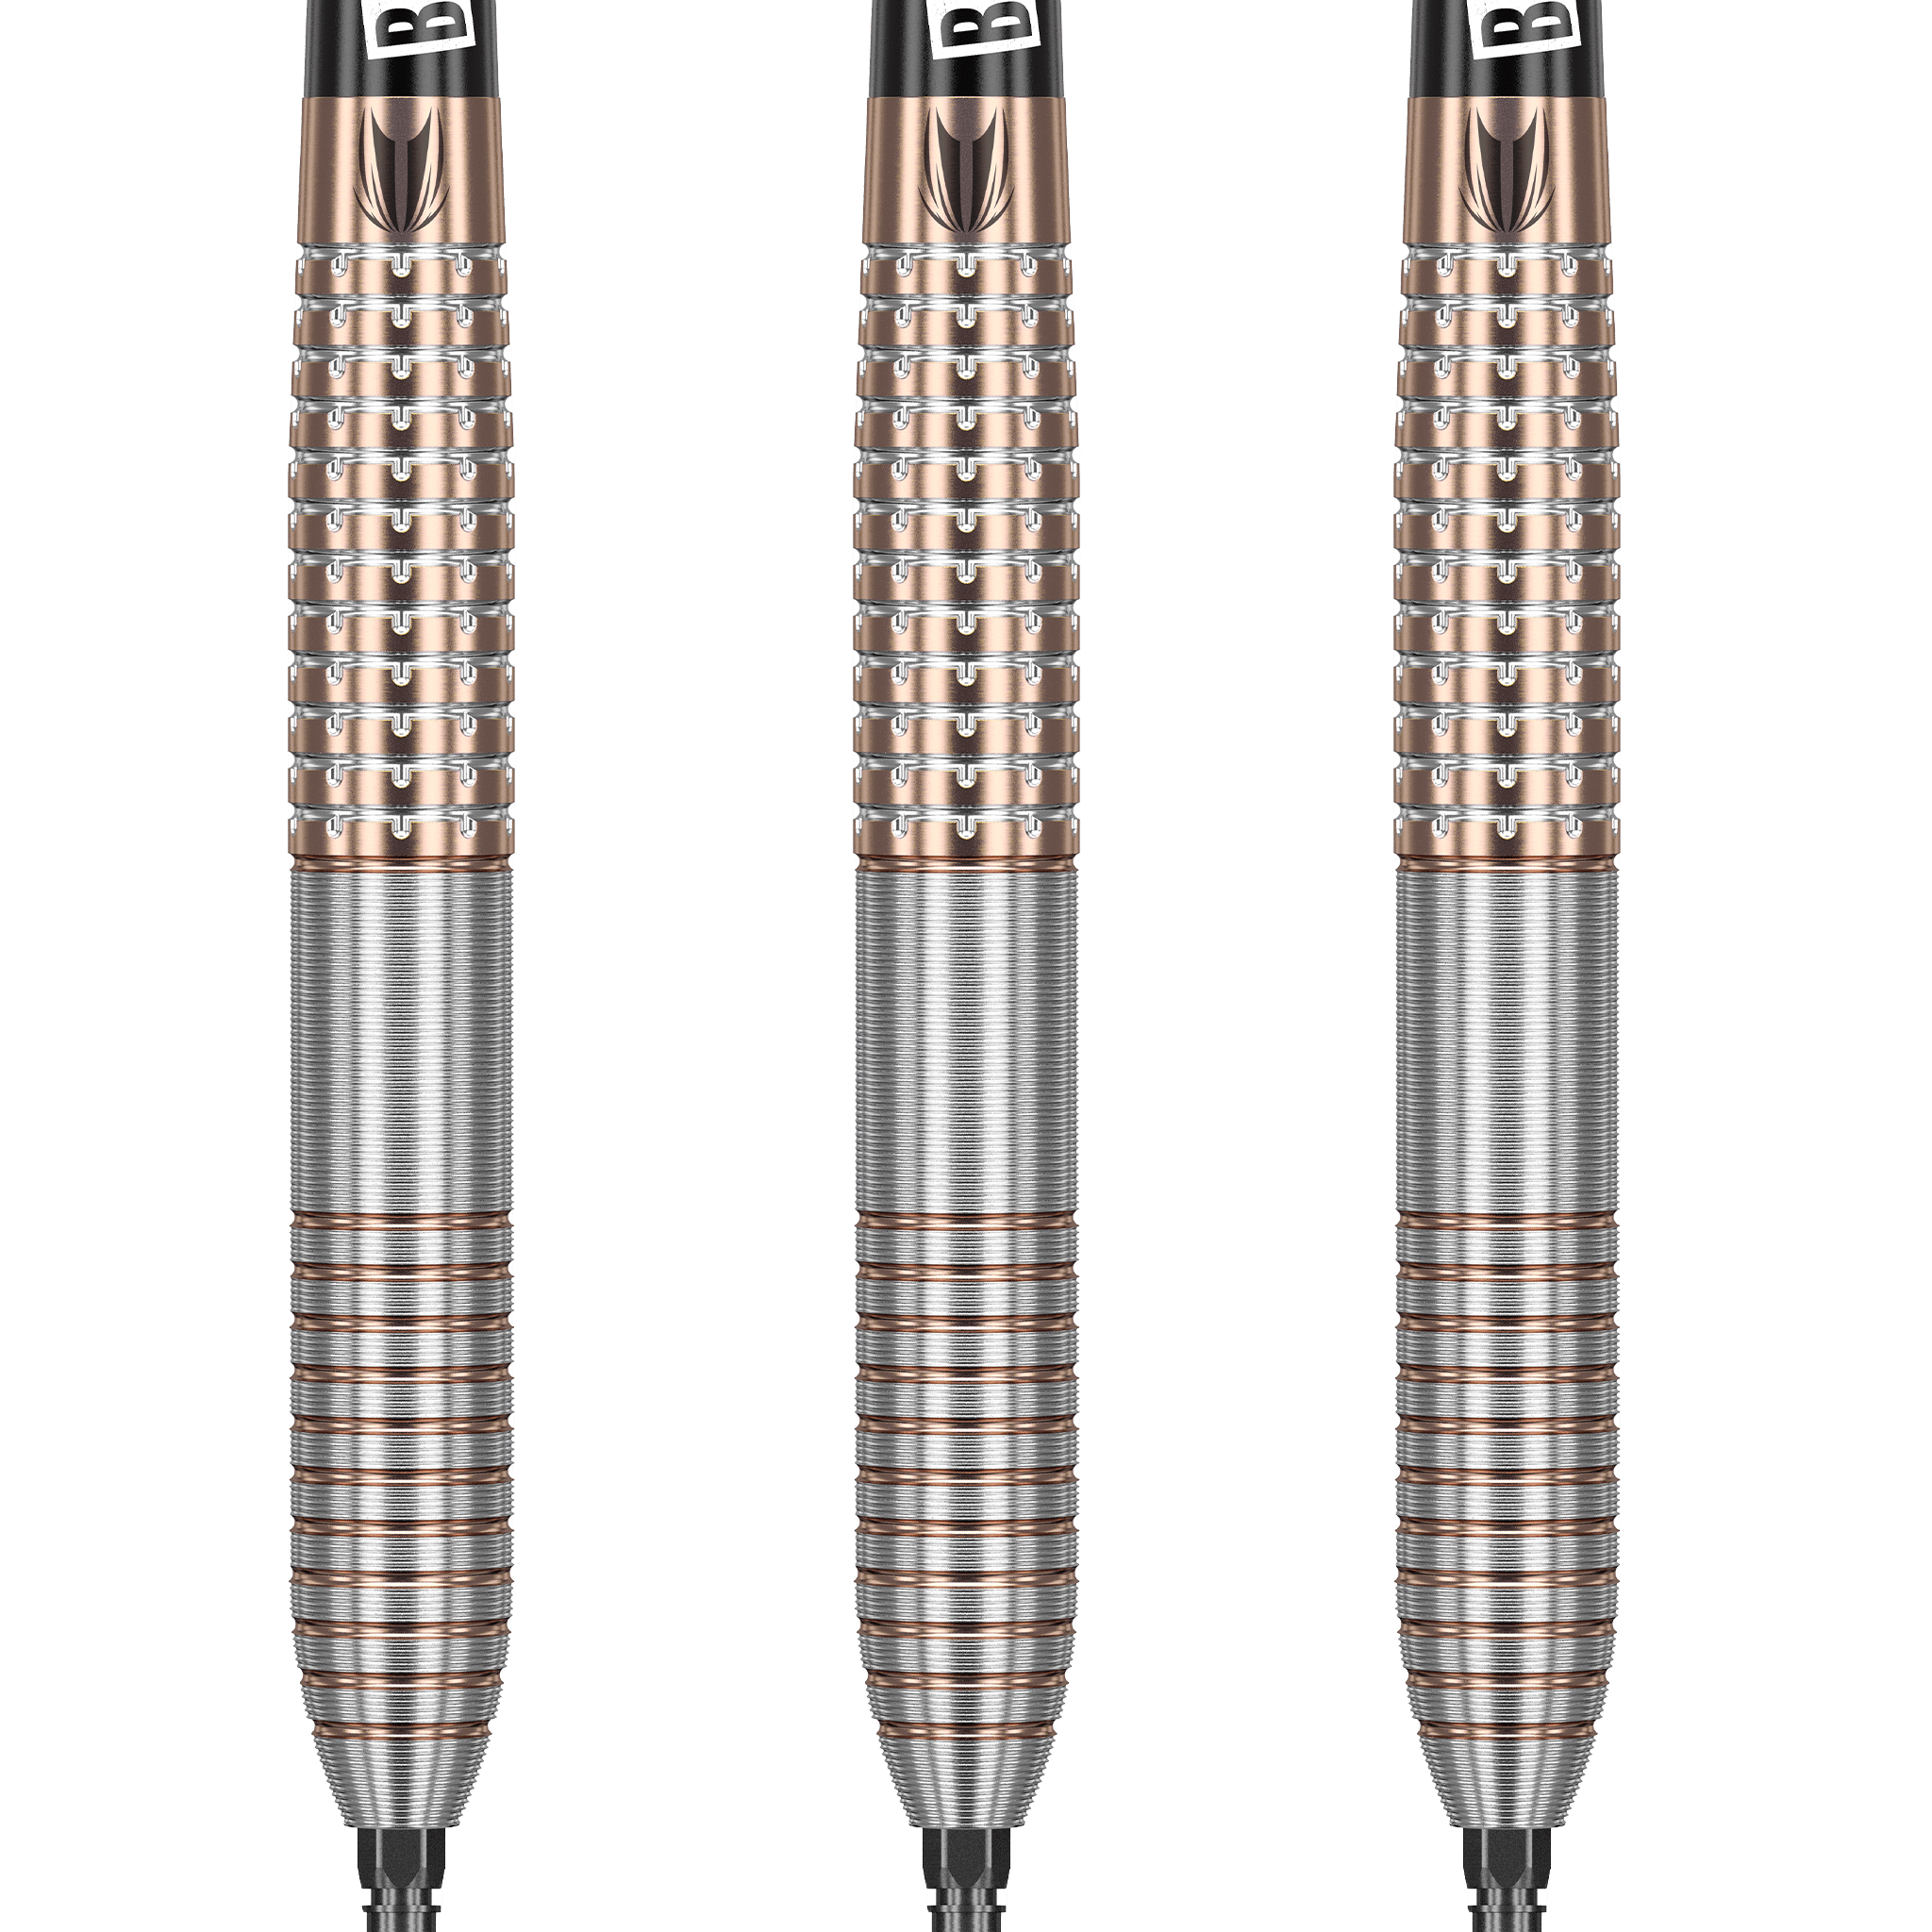 Target RVB Legacy Limited Edition Swiss Point Steel Tip Darts - 95% Tungsten - 25 Grams Darts